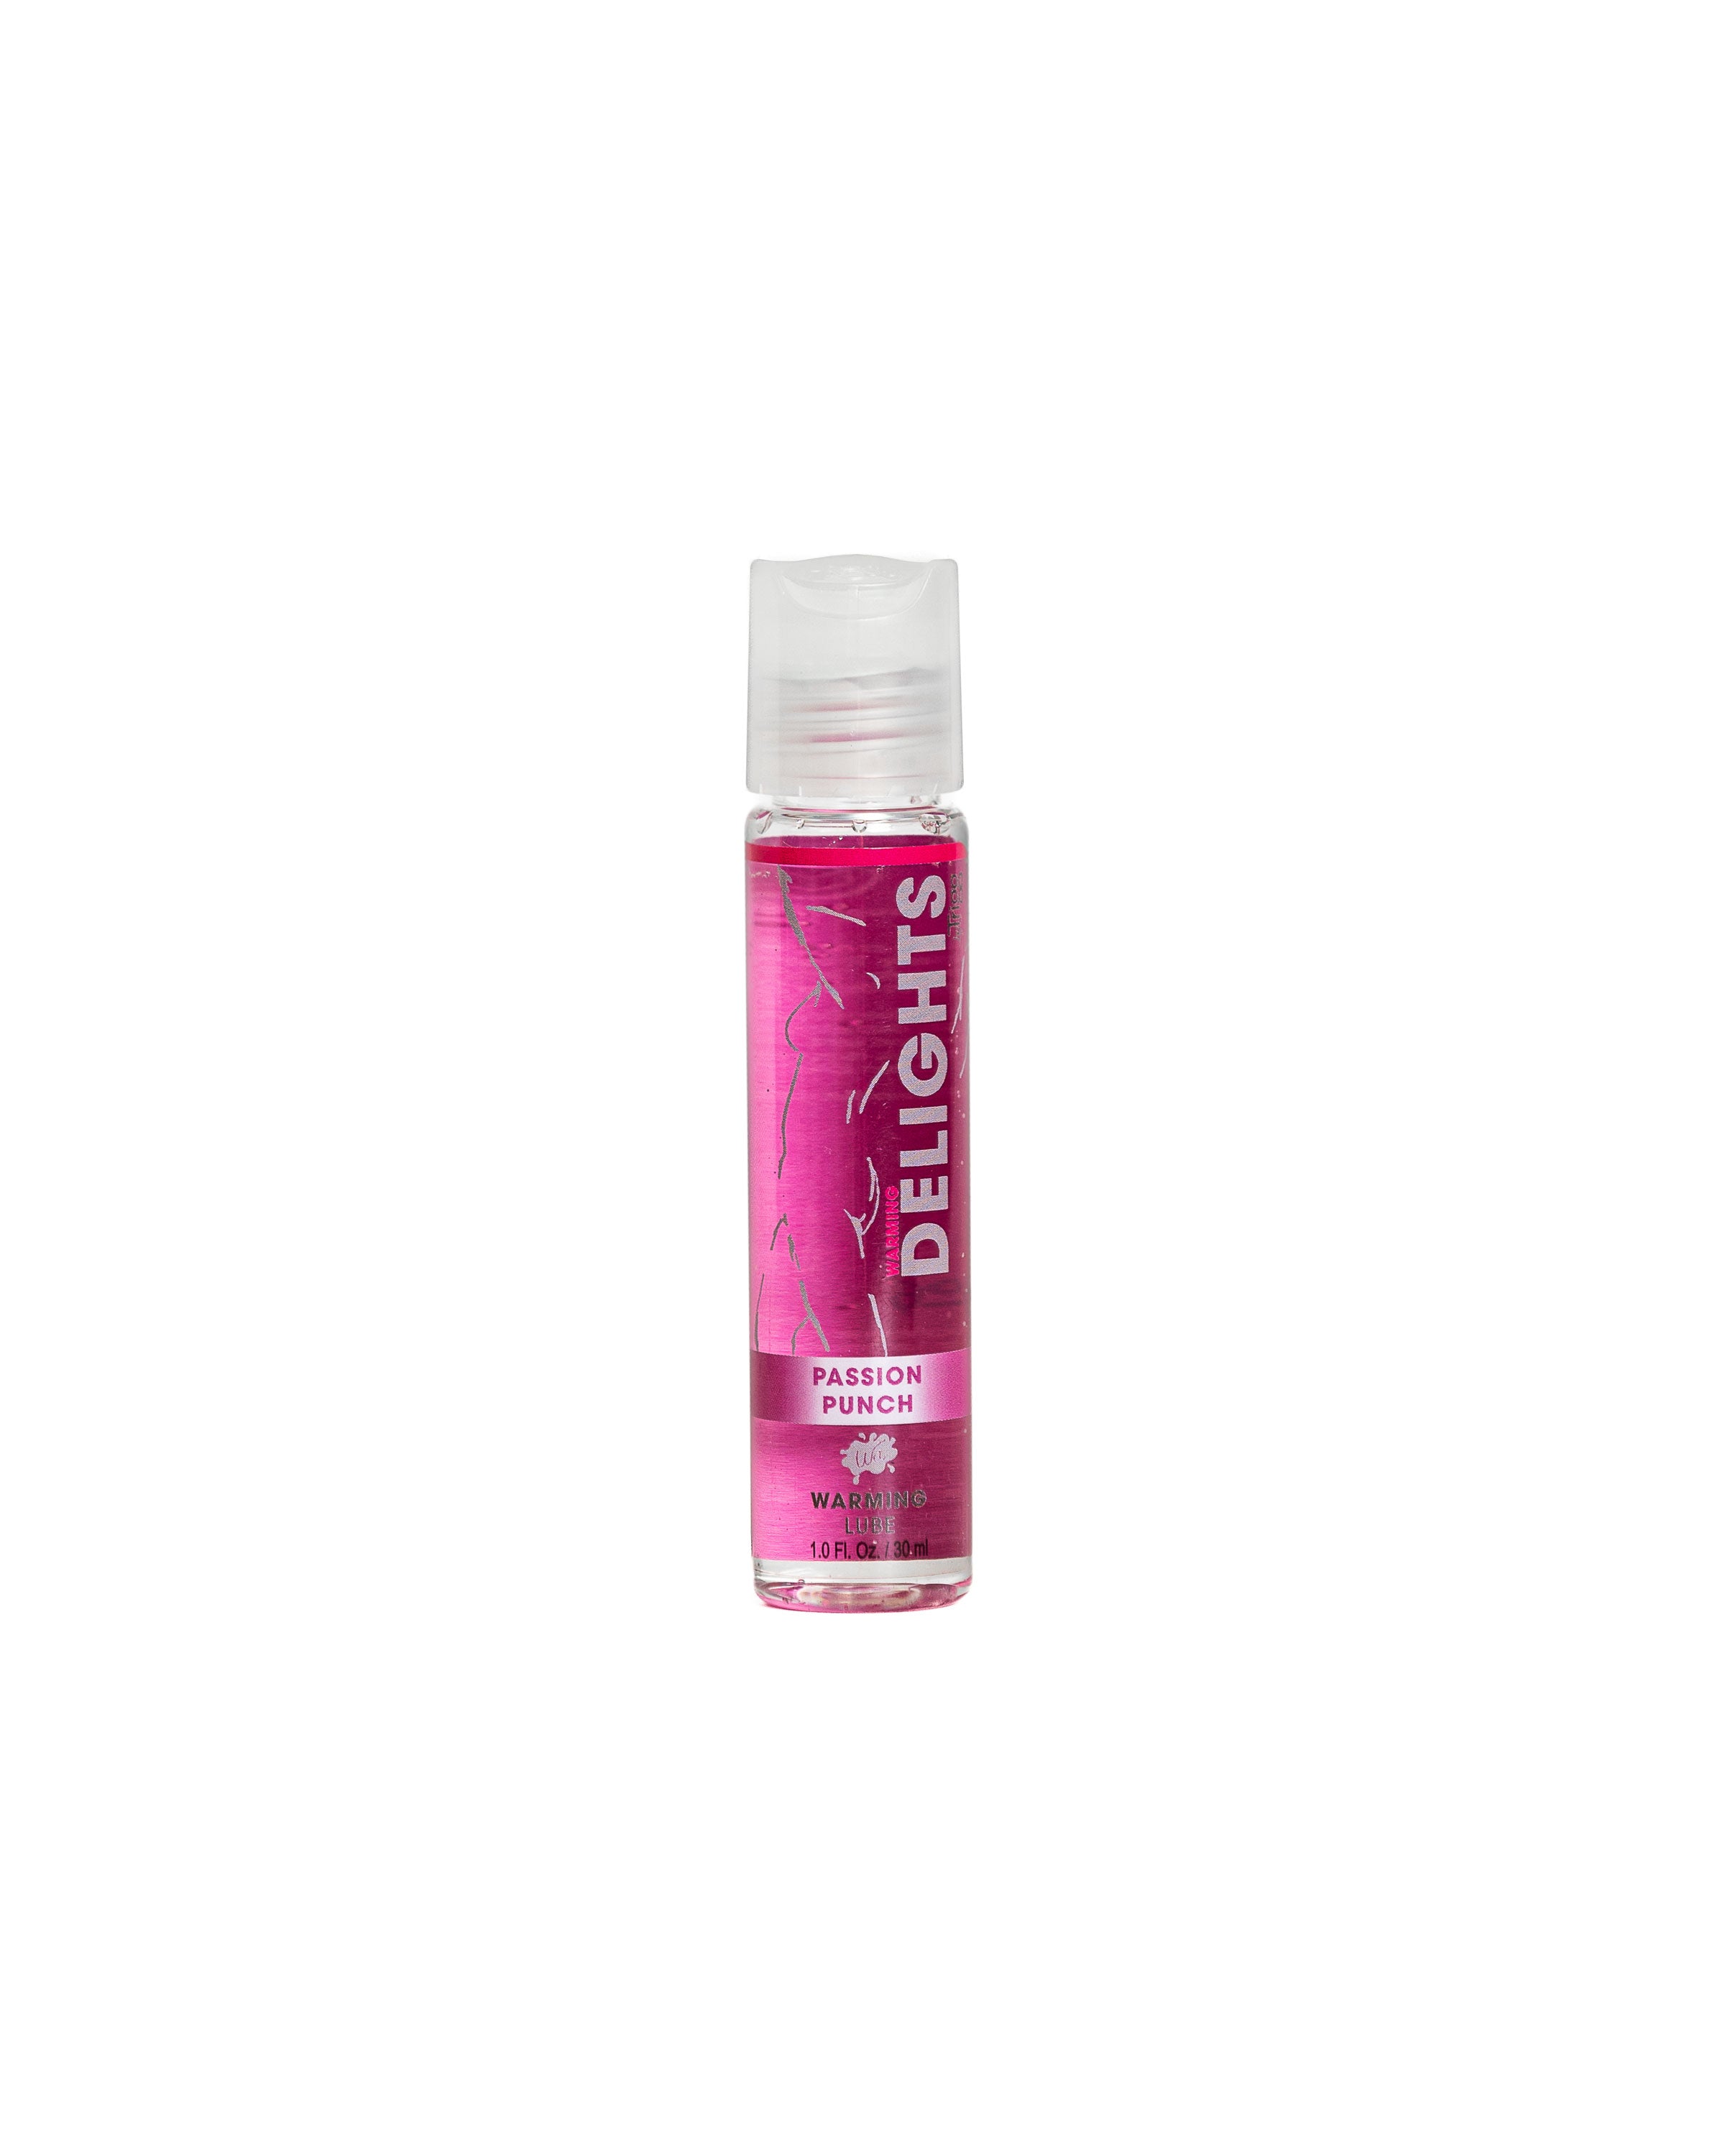 Warming Delights - Passion Punch - Flavored Lube 1 Oz-0